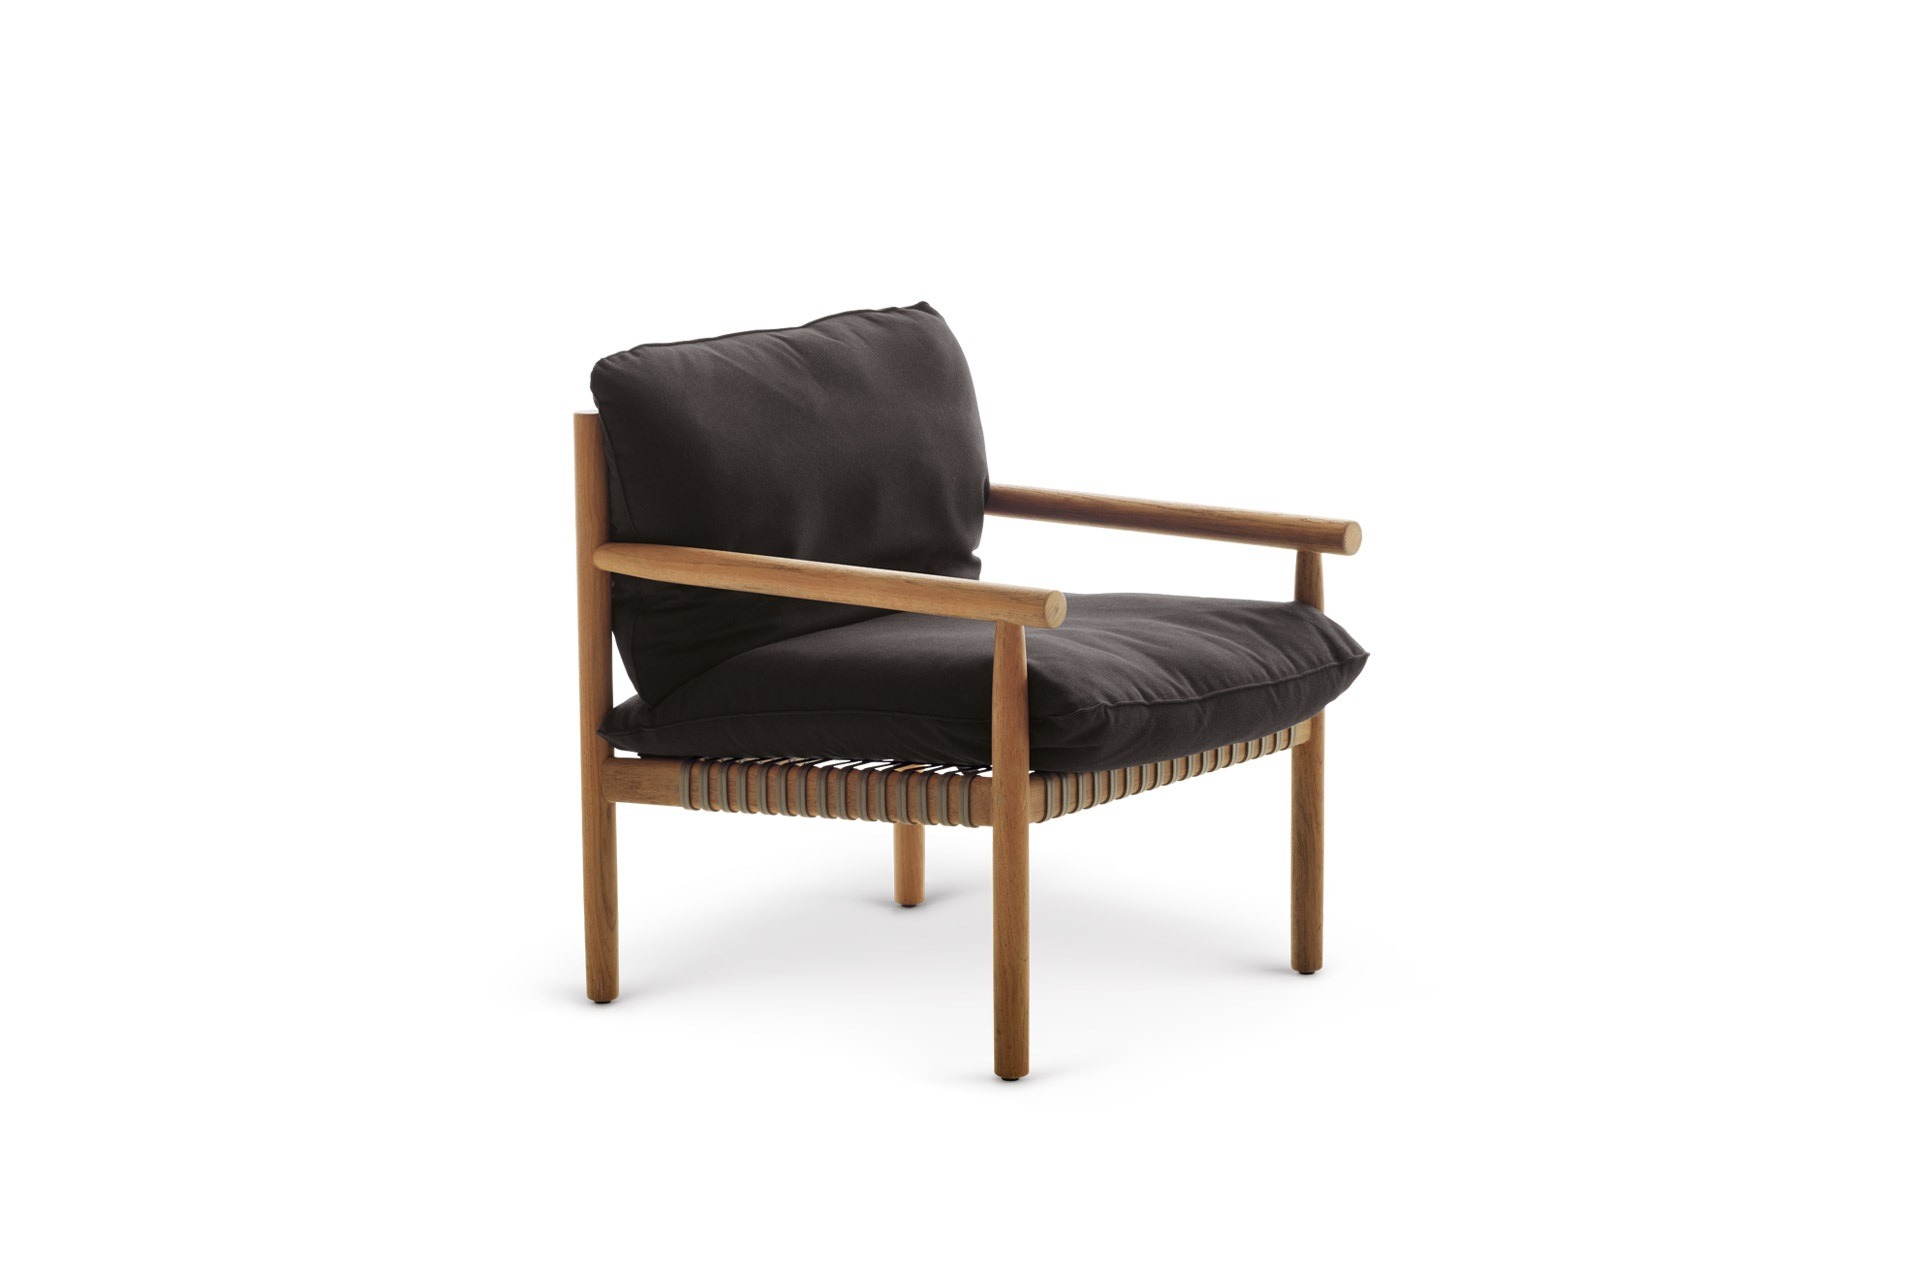 Luxury Tibbo Lounge Chair With Cushion By Dedon Affordable